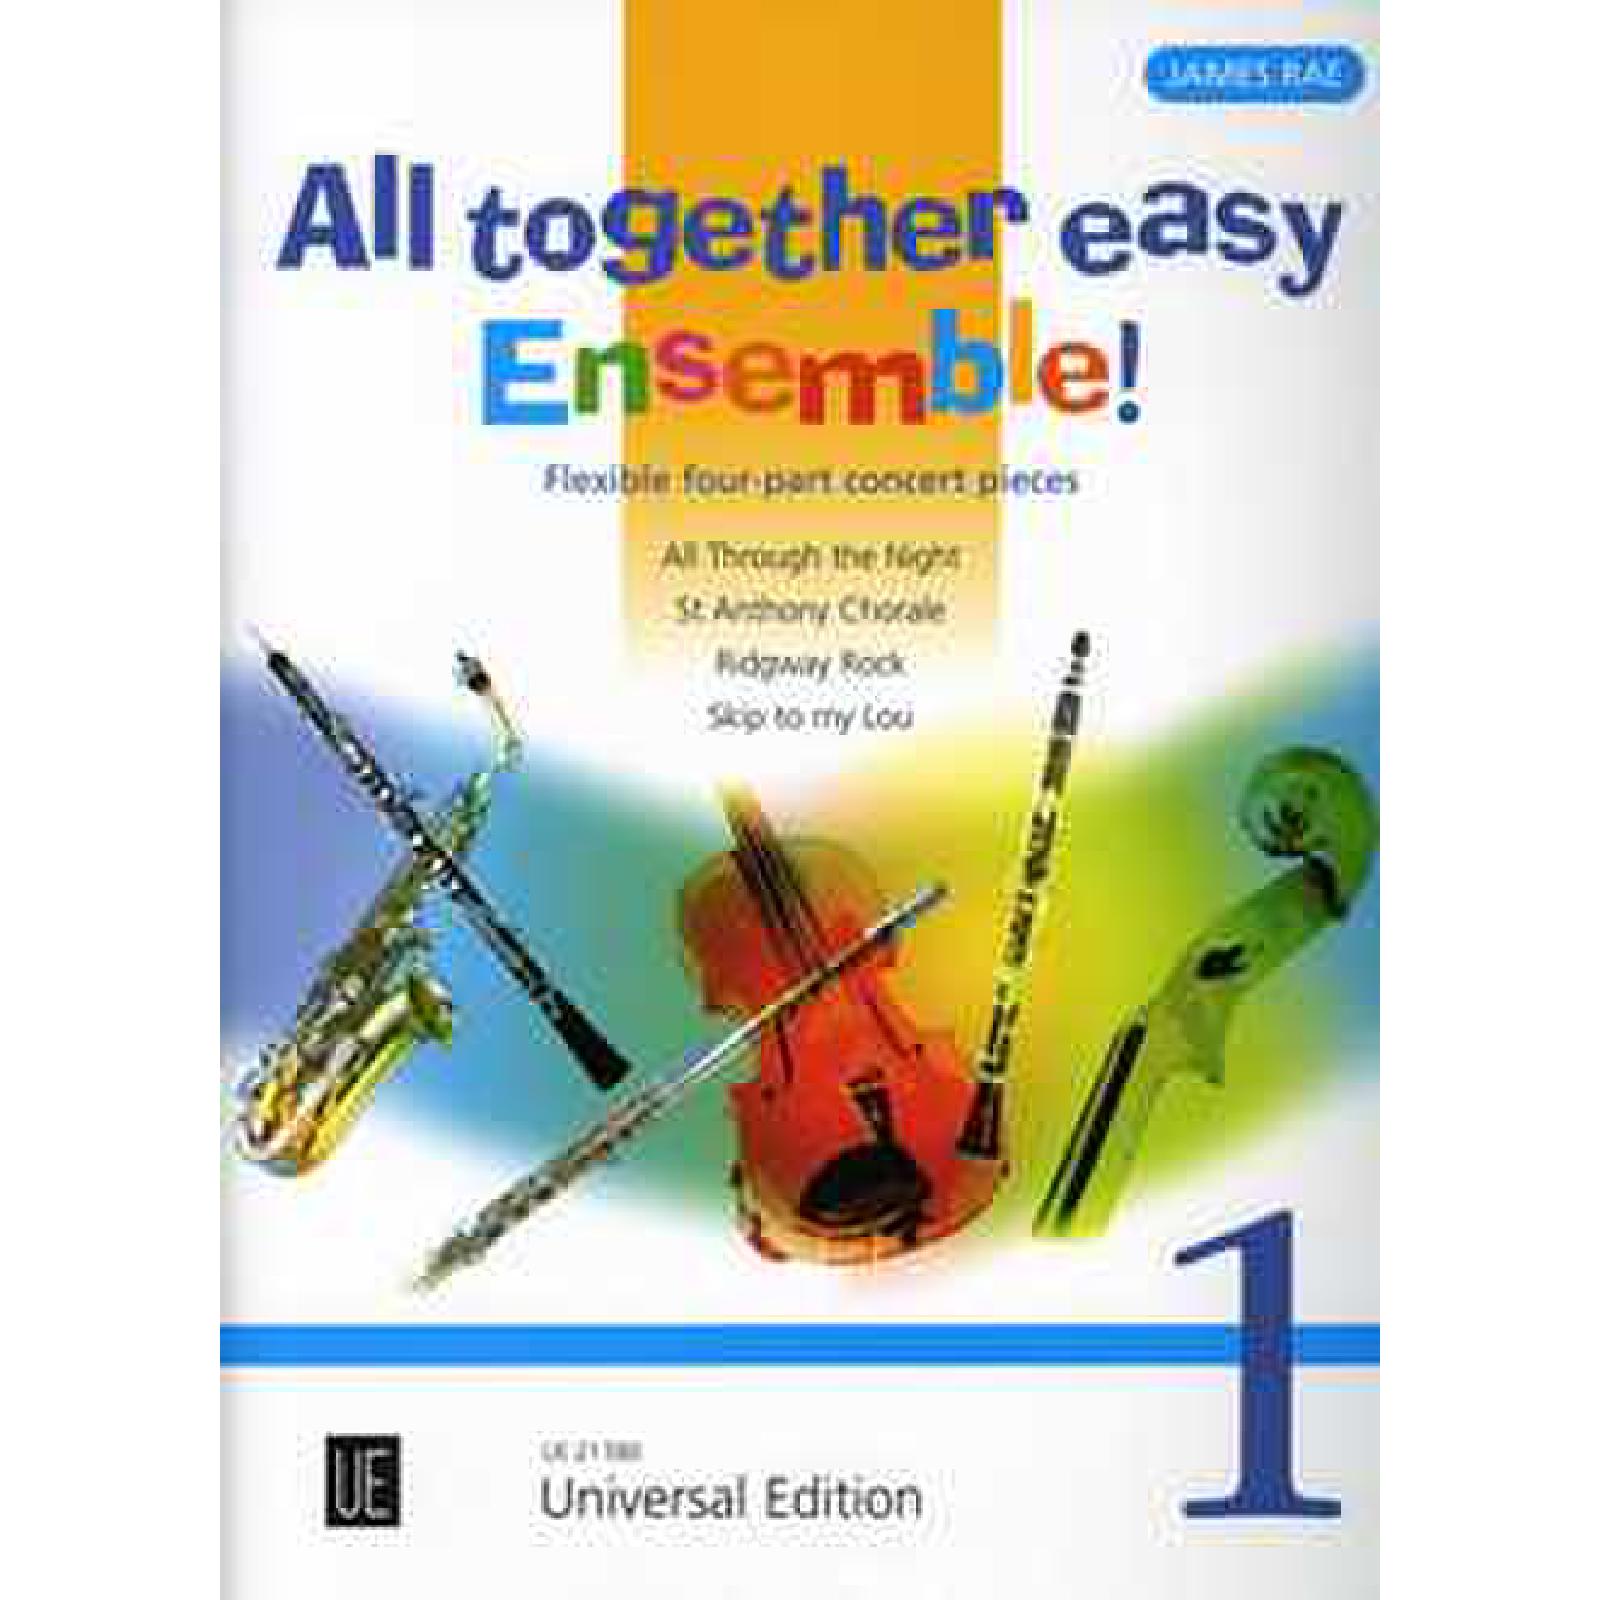 All together easy Ensemble 1 - Flexible 4 Part